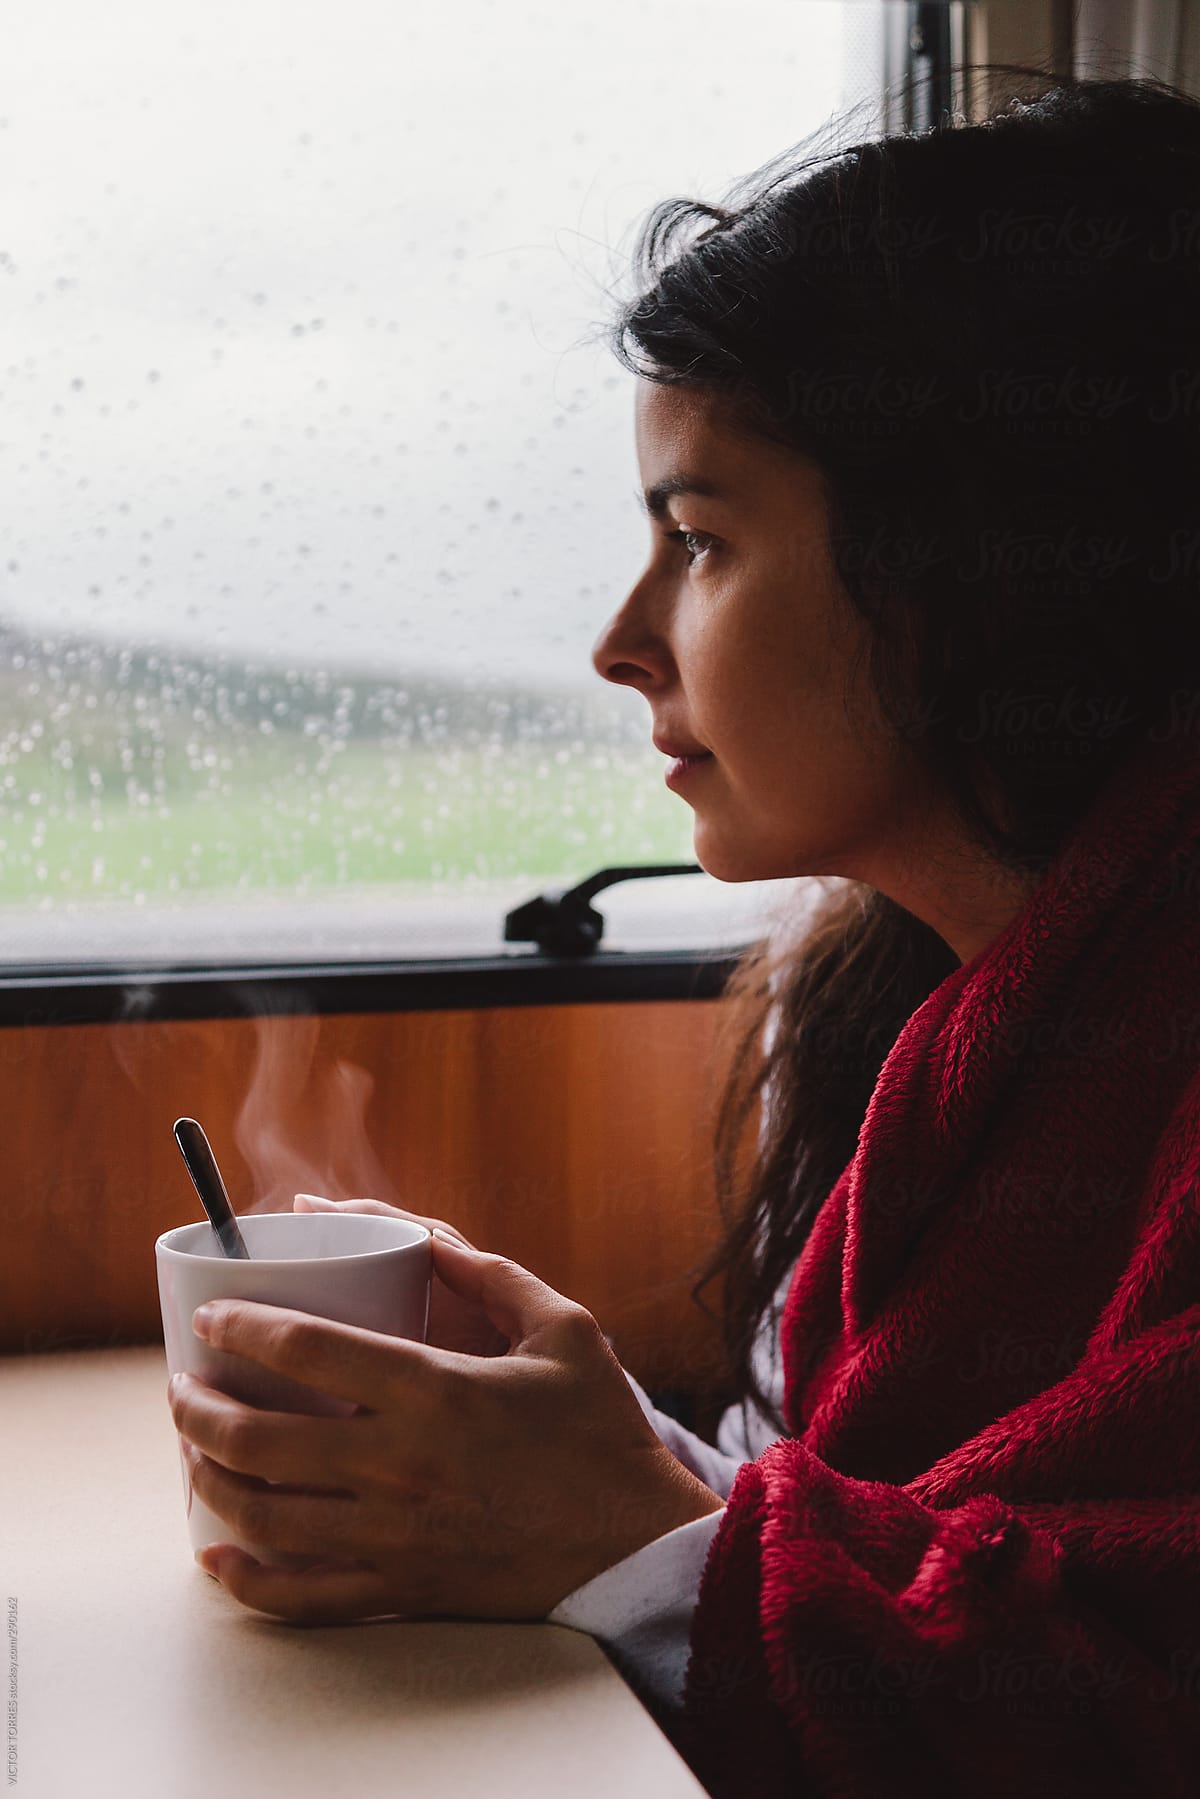 Young Woman Having a Warm Tea with a Red Blanket inside a Motorhome